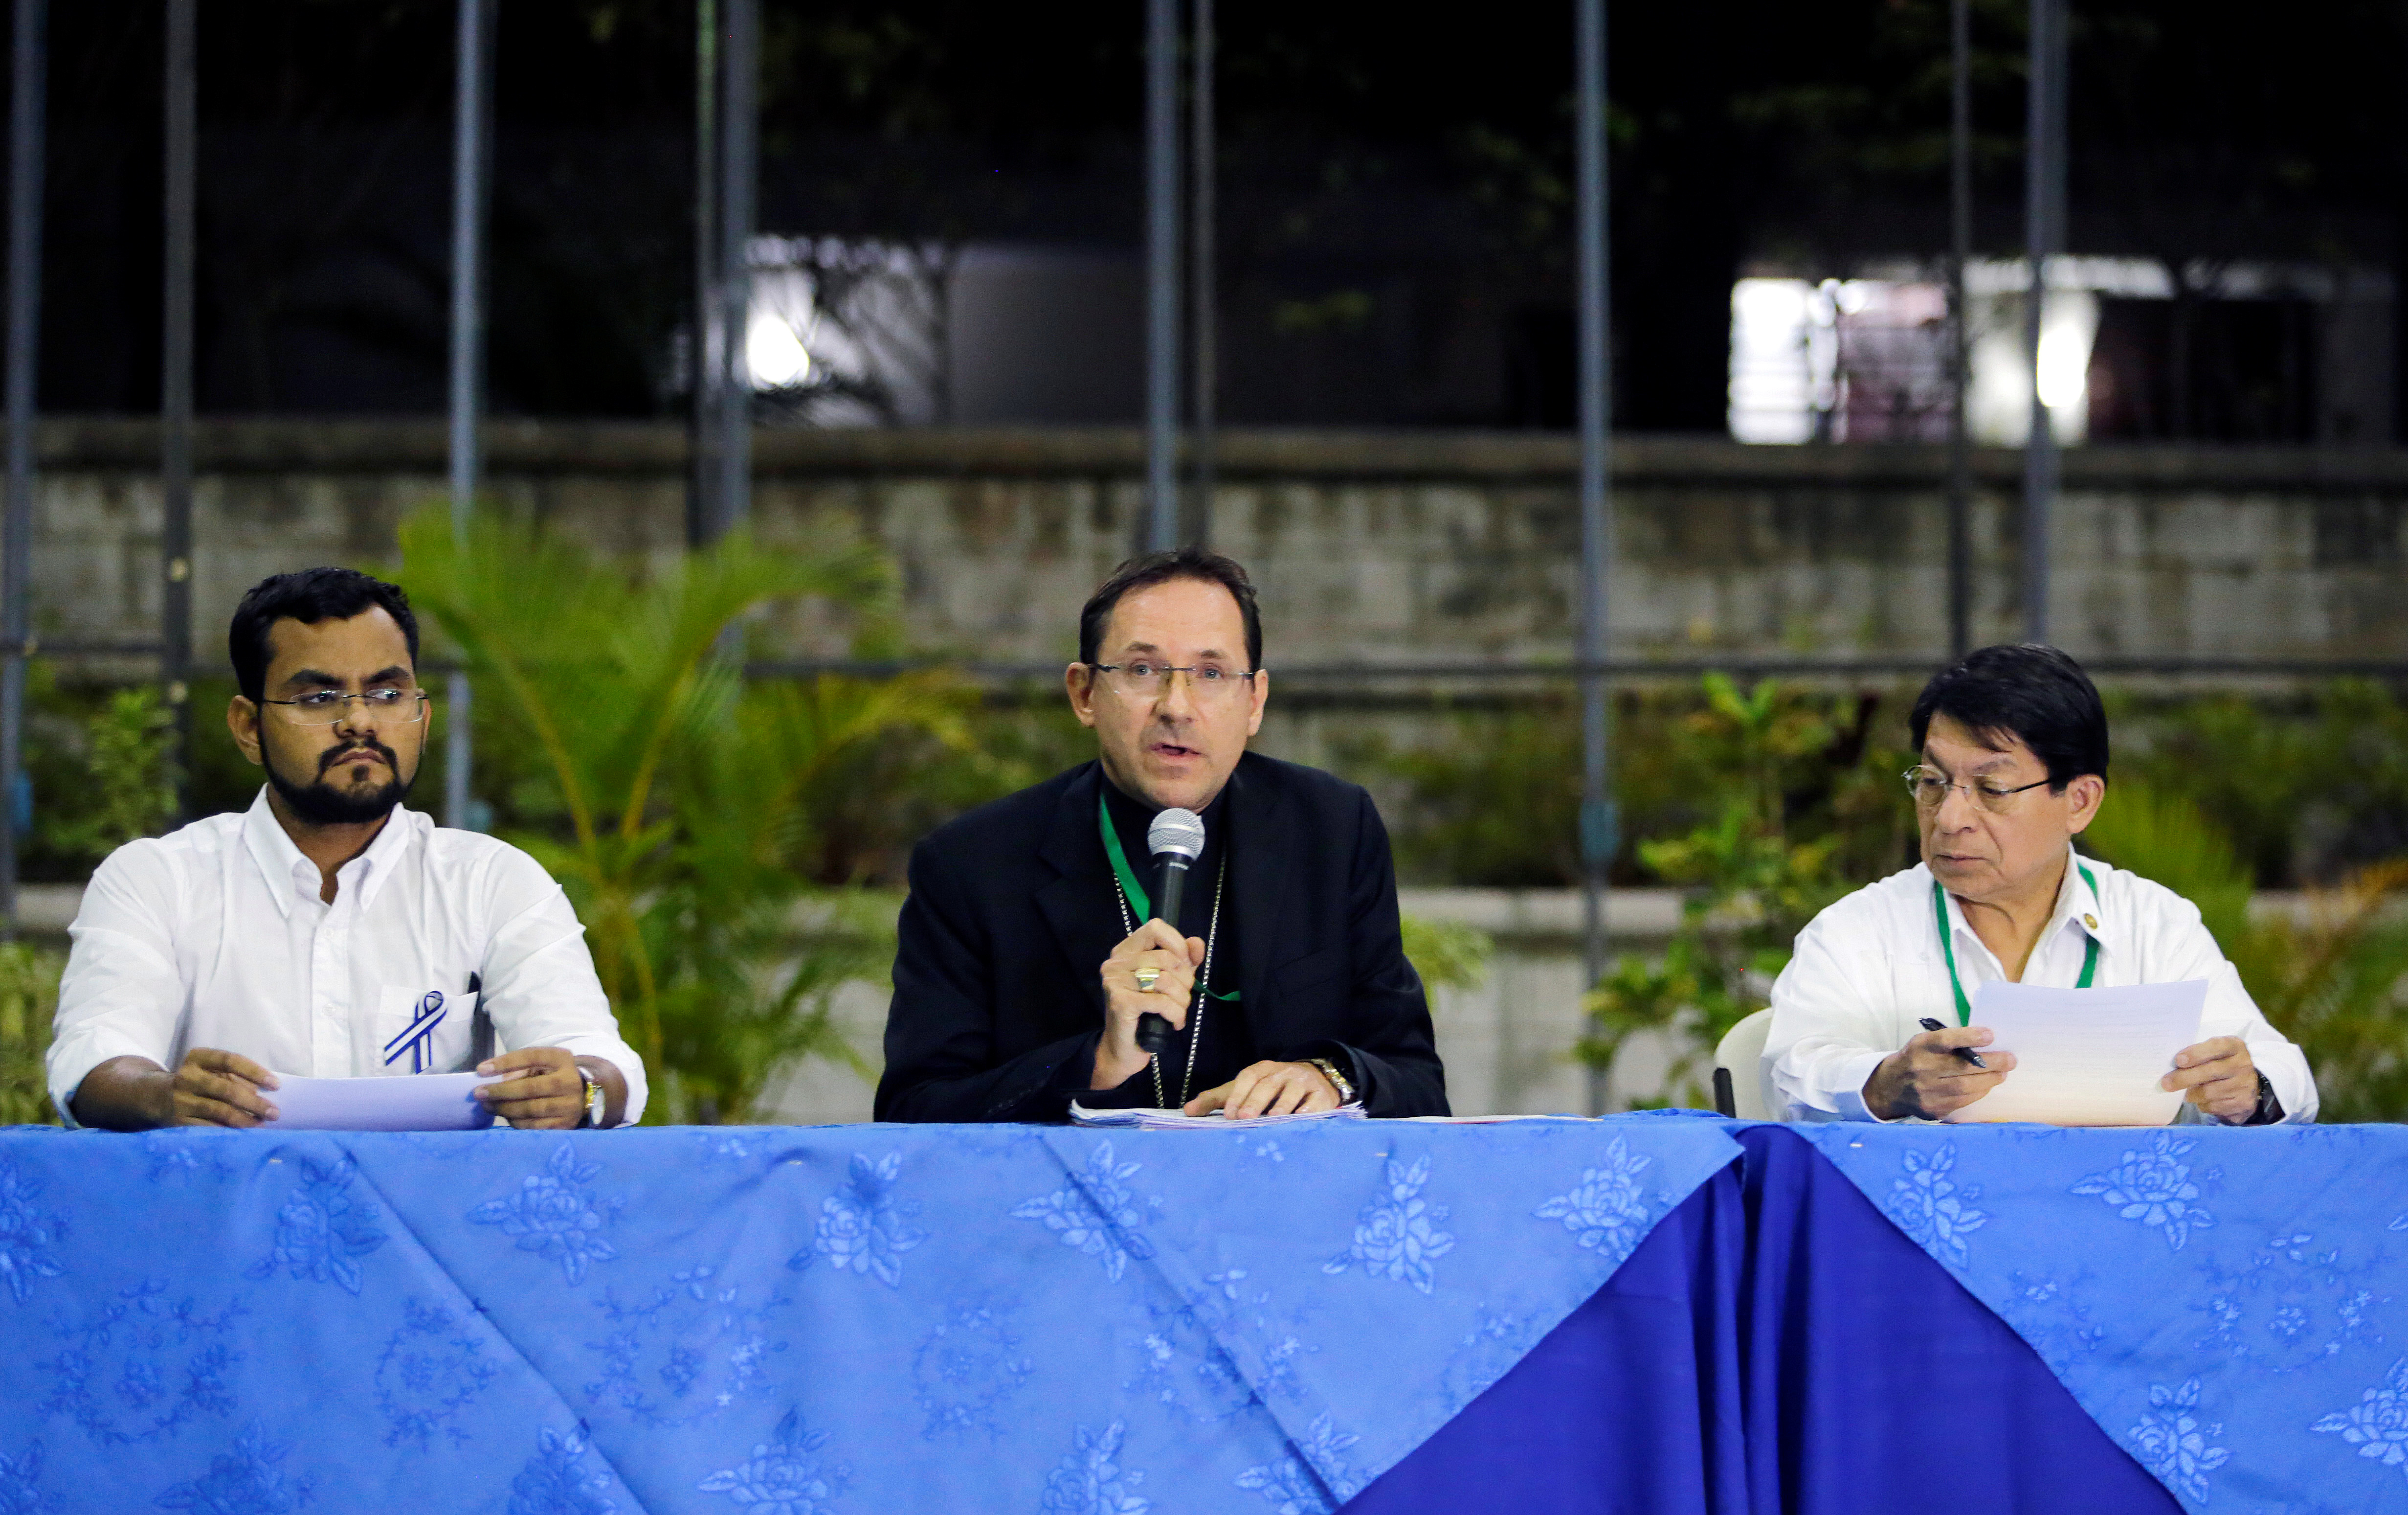 Apostolic Nuncio Monsignor Stanislaw Sommertag speaks during a news conference in Managua